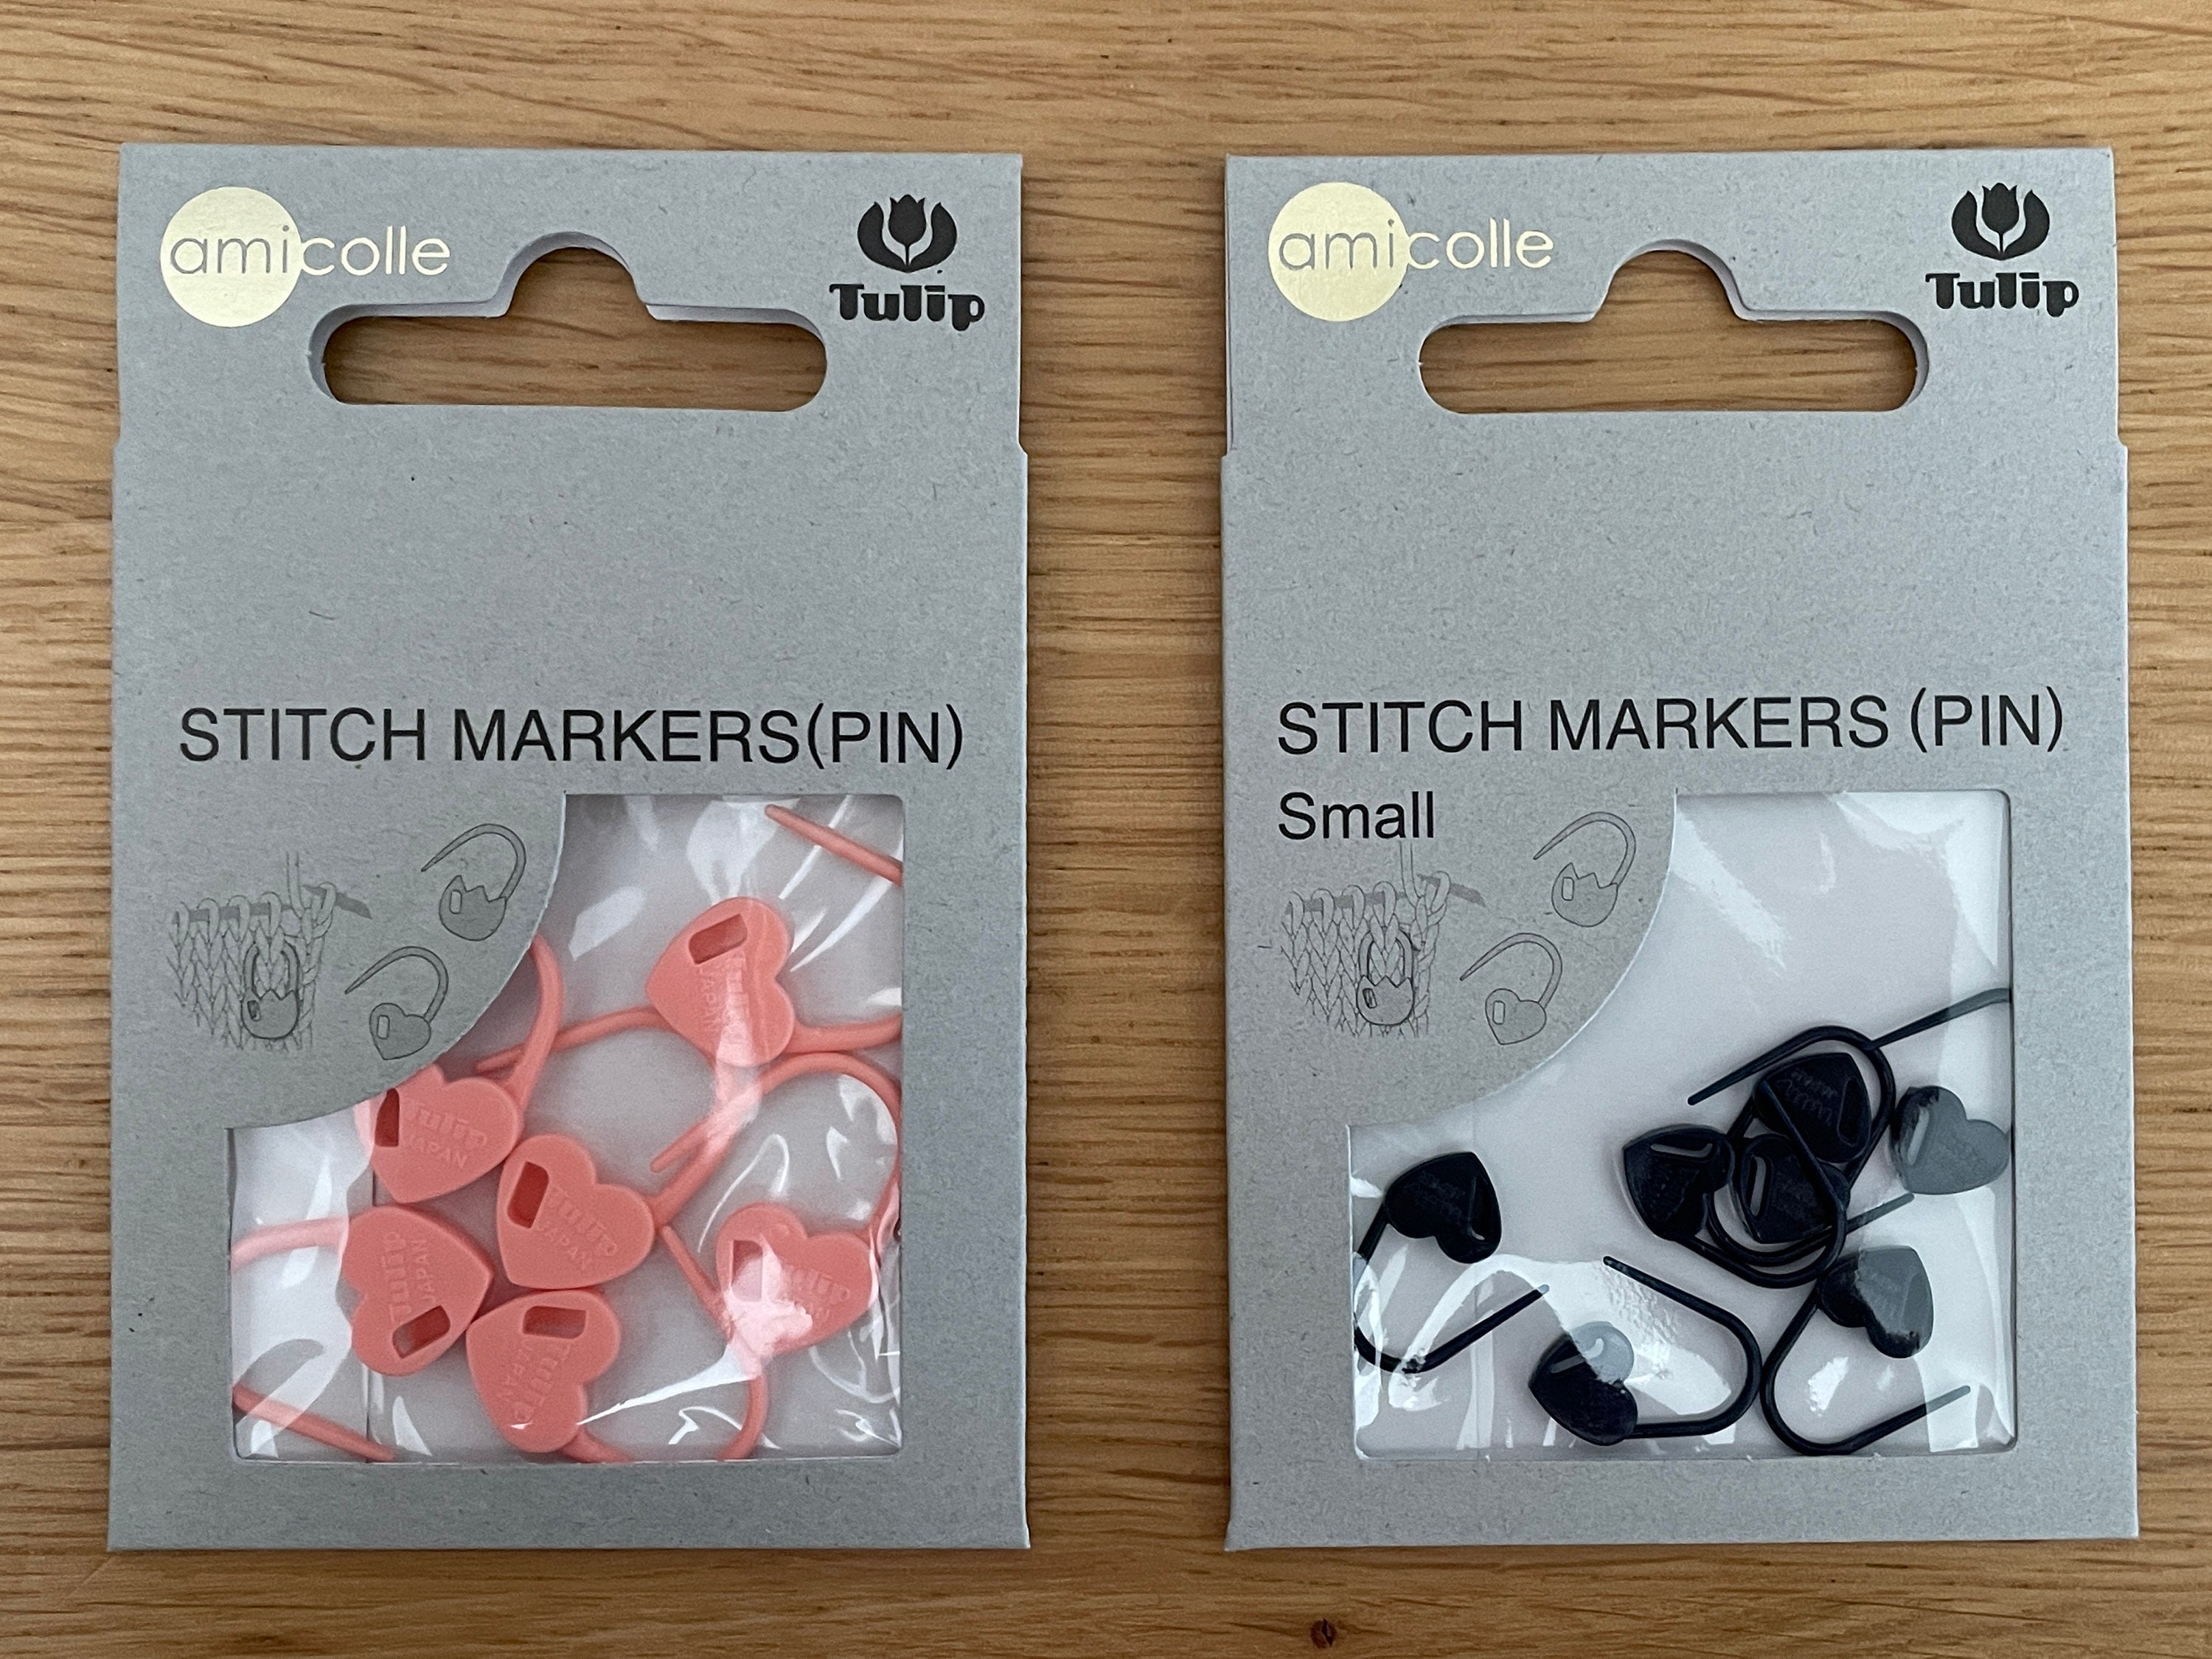 Tulip Heart Stitch Markers Amicolle Knitting Accessories Small 